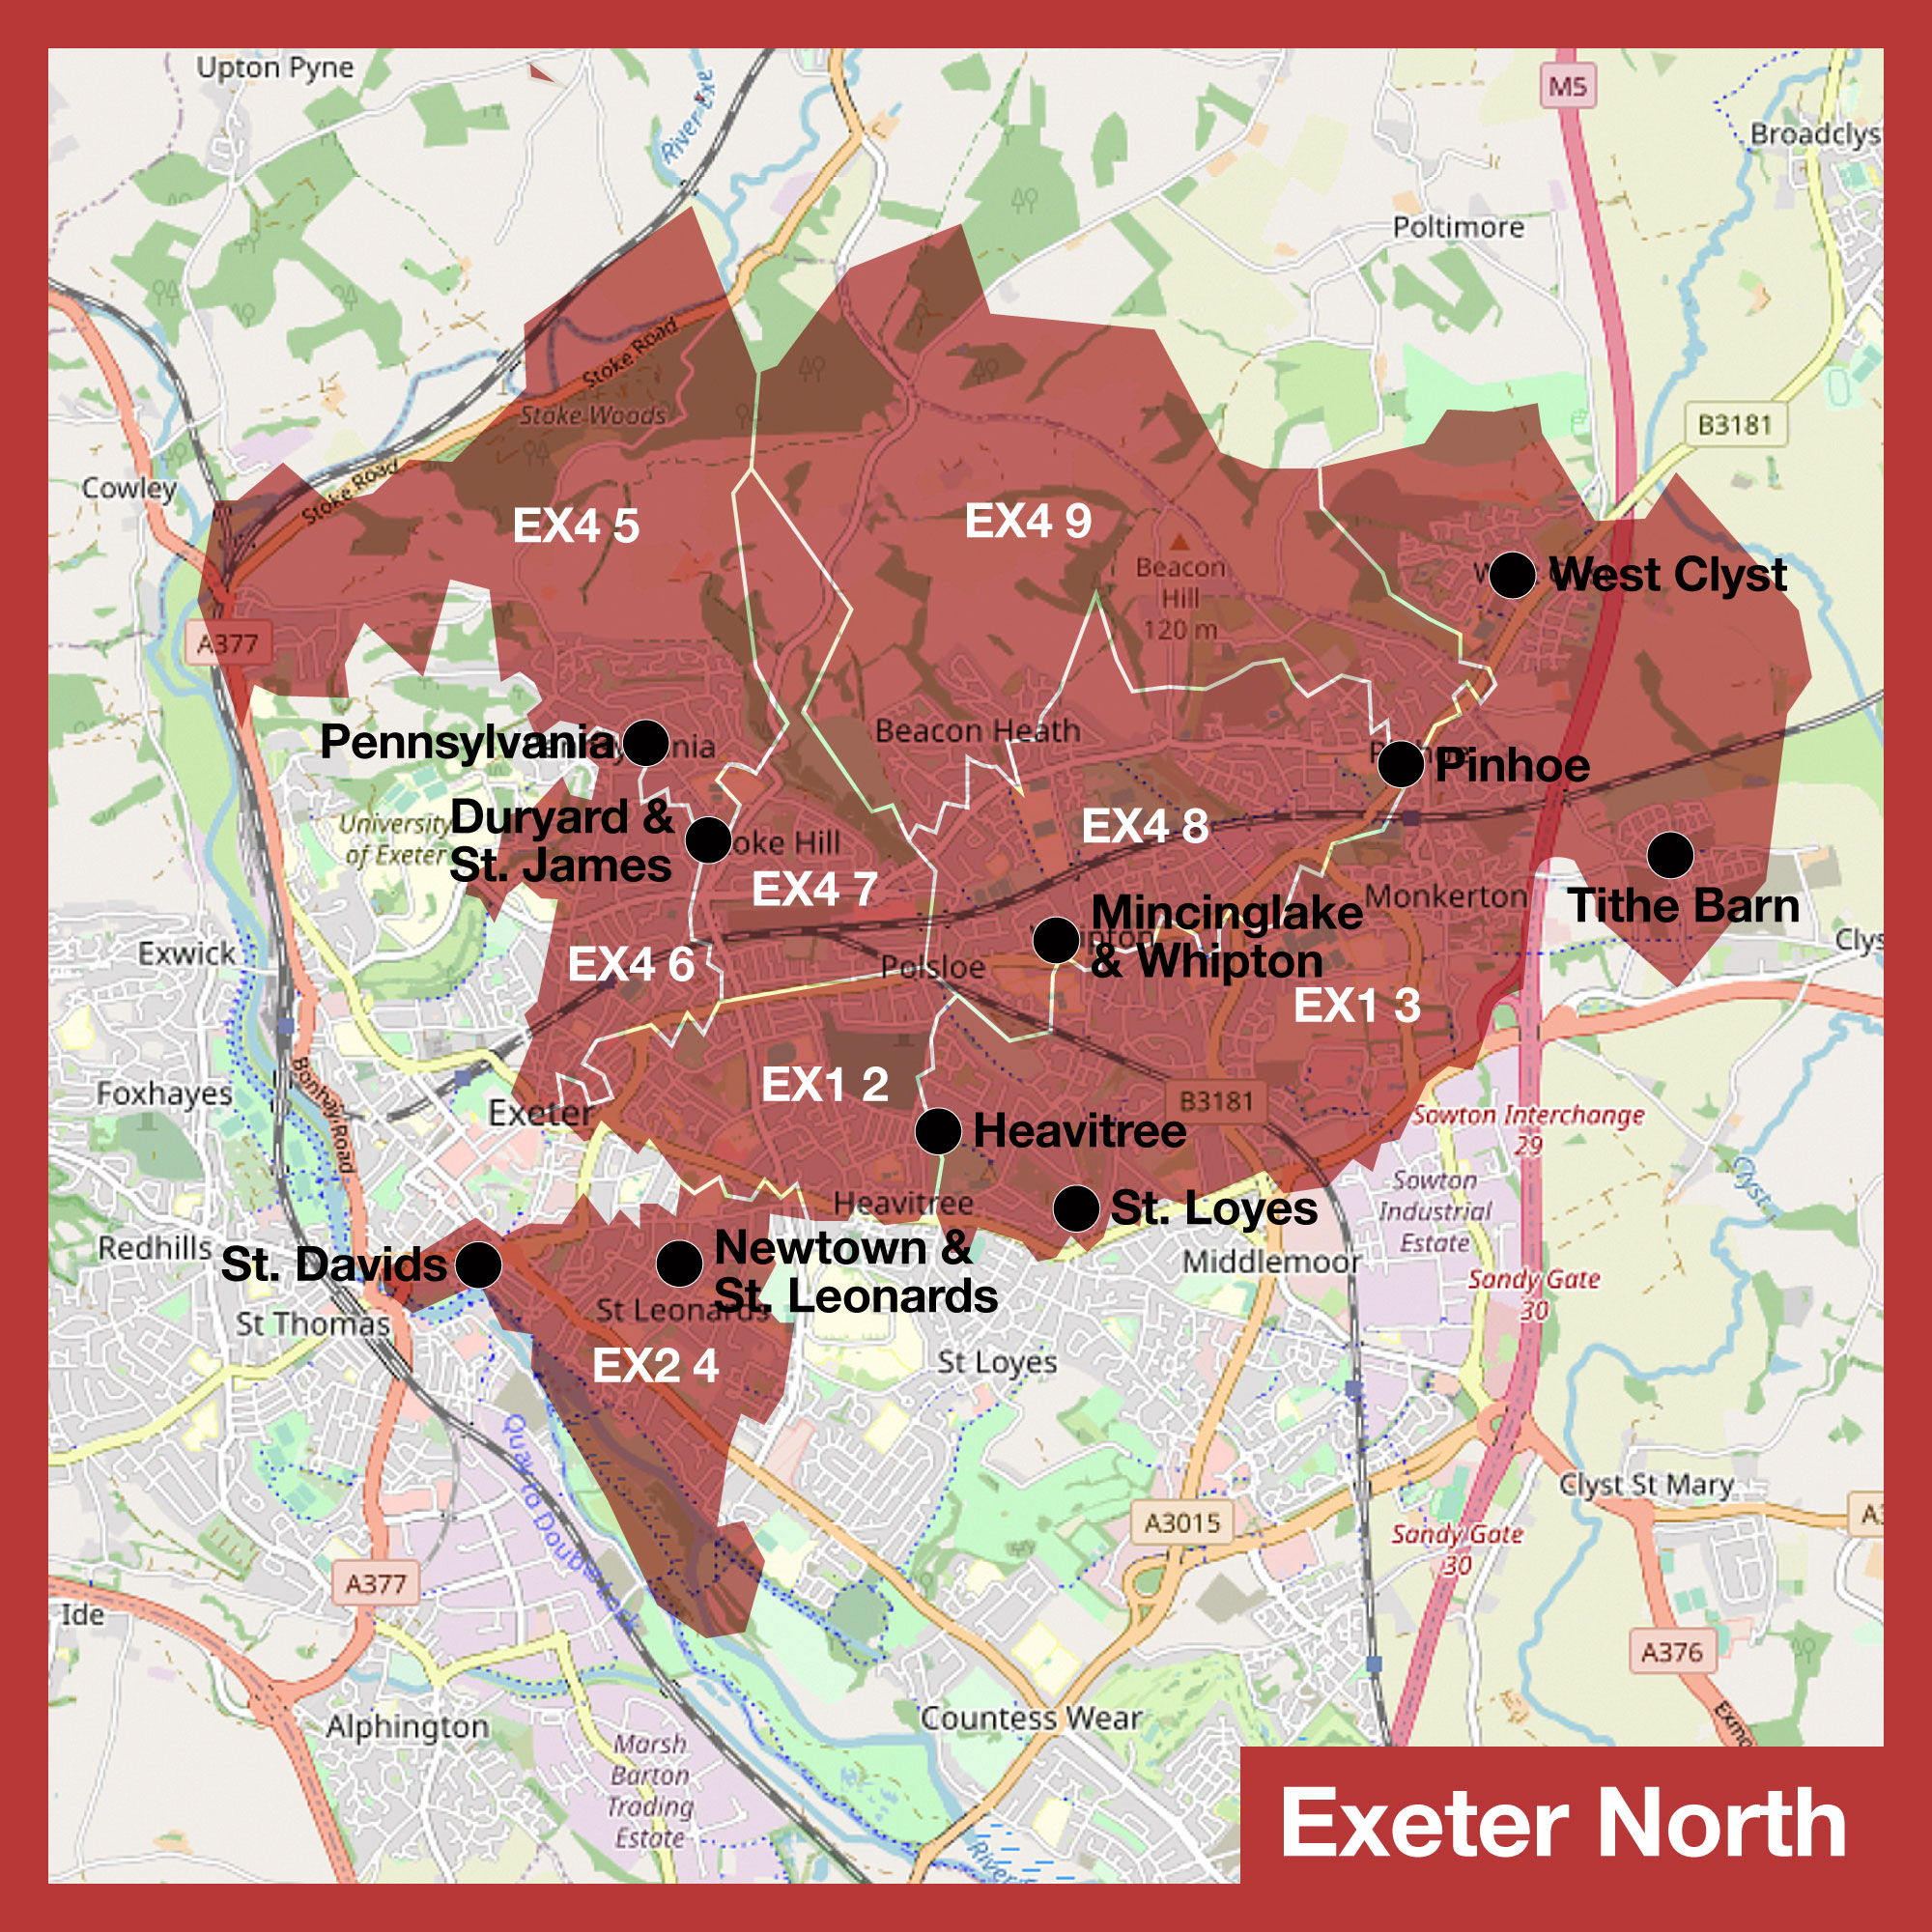 Exeter-North-Advertising-Areas-One-Magazine